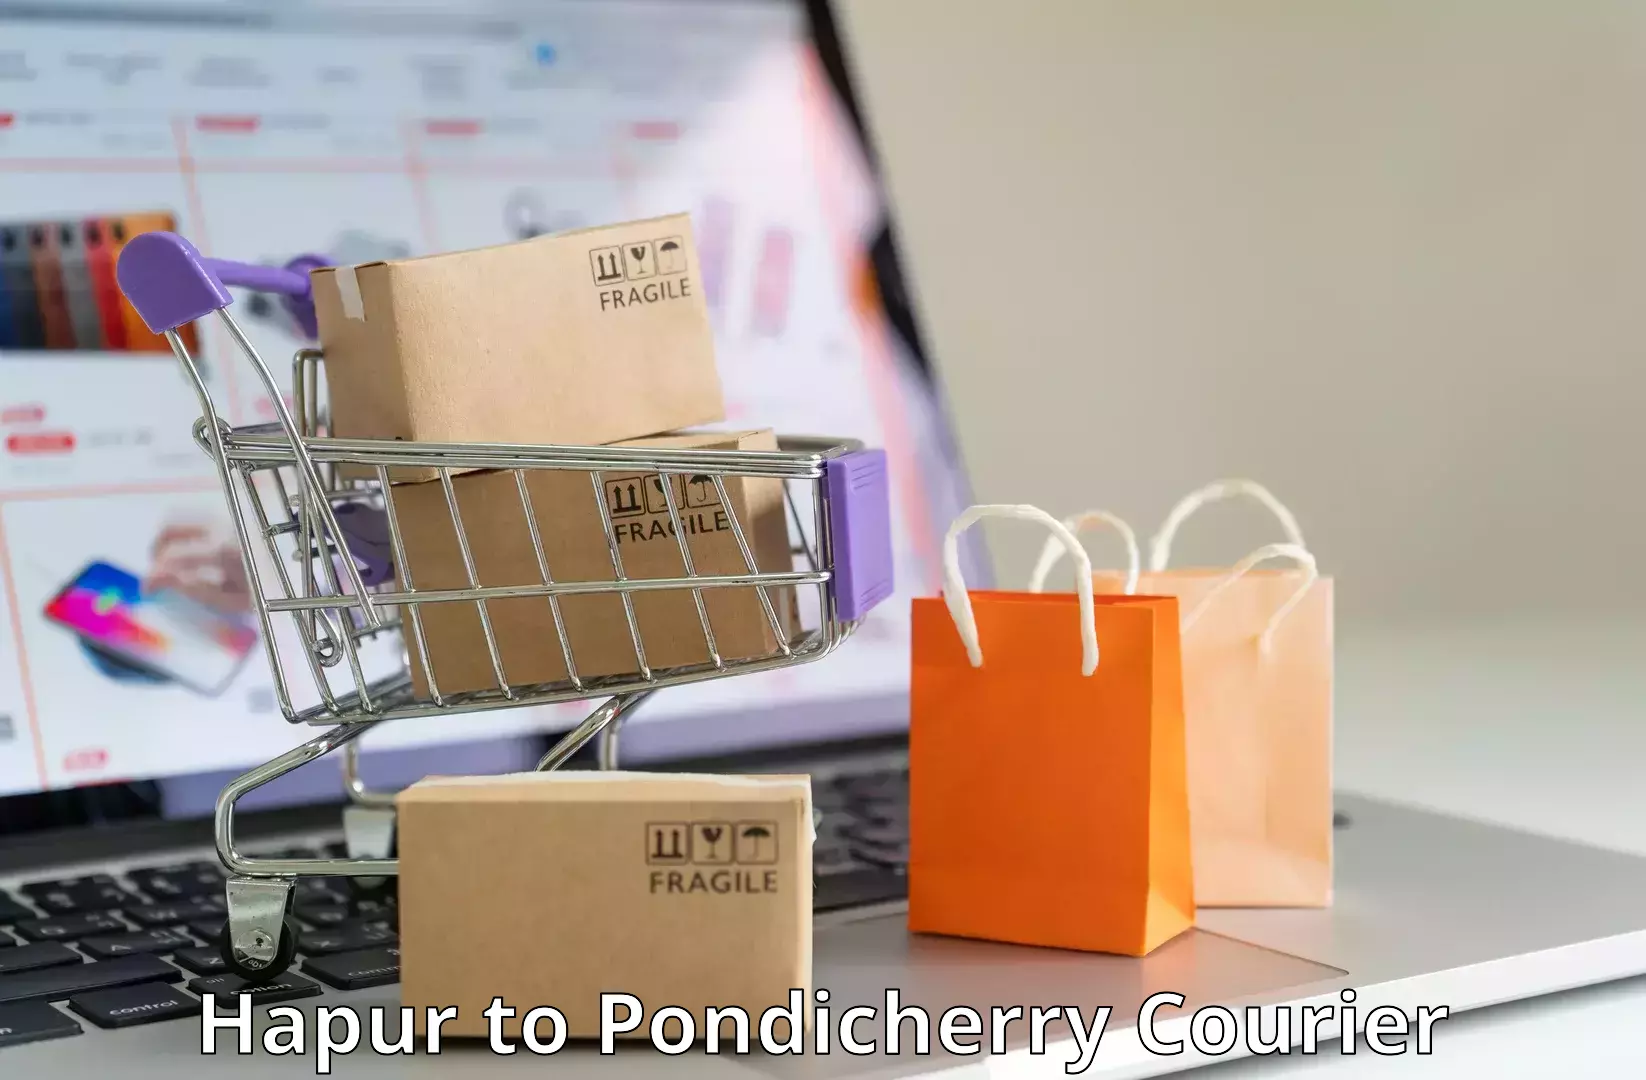 Overnight delivery services Hapur to Pondicherry